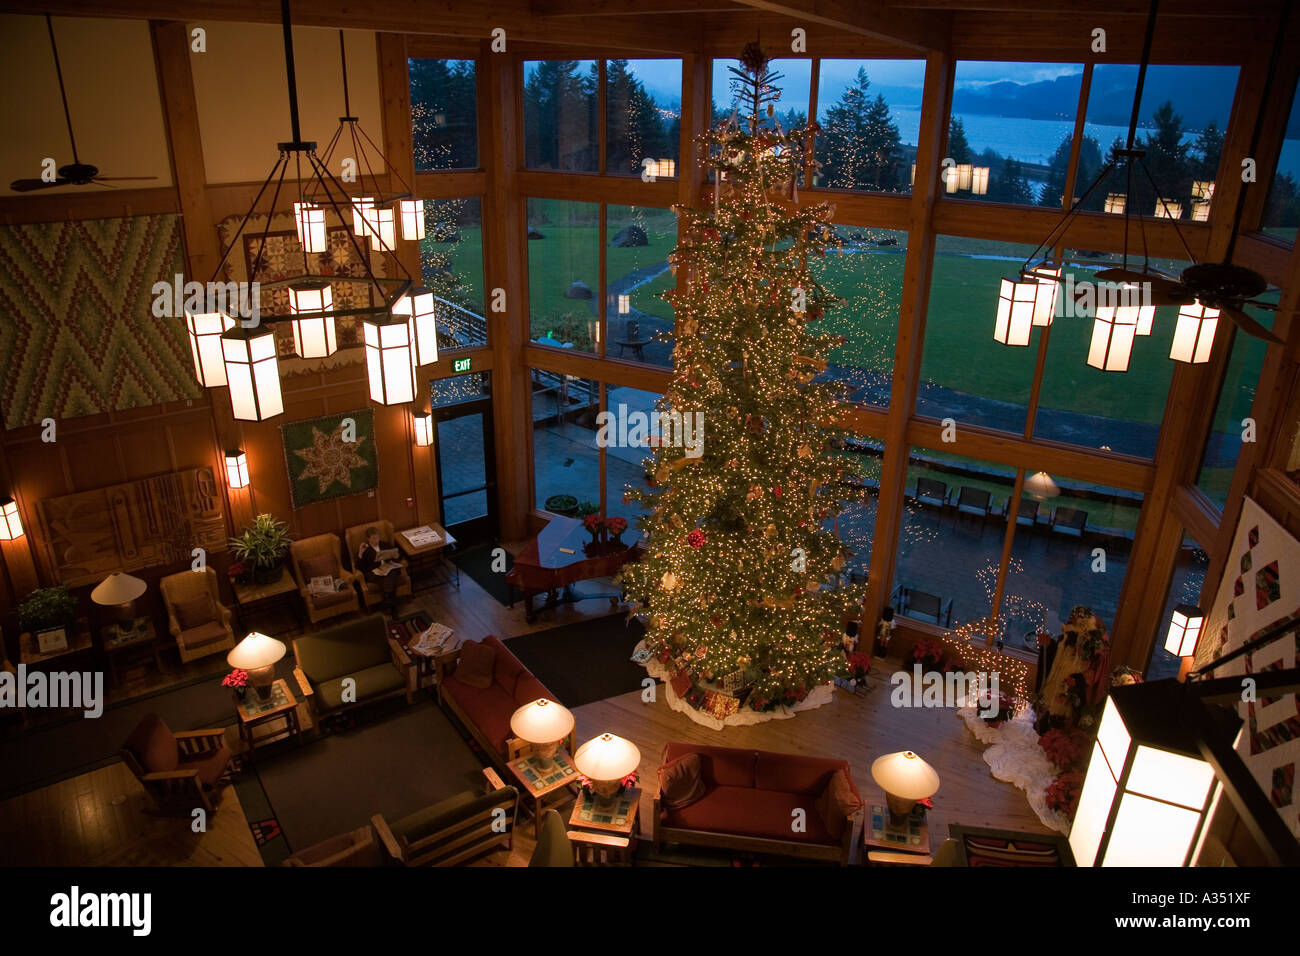 skamania lodge christmas events 2020 30 Foot Tall Christmas Tree Stands In Lobby Of Skamania Lodge Stock Photo Alamy skamania lodge christmas events 2020